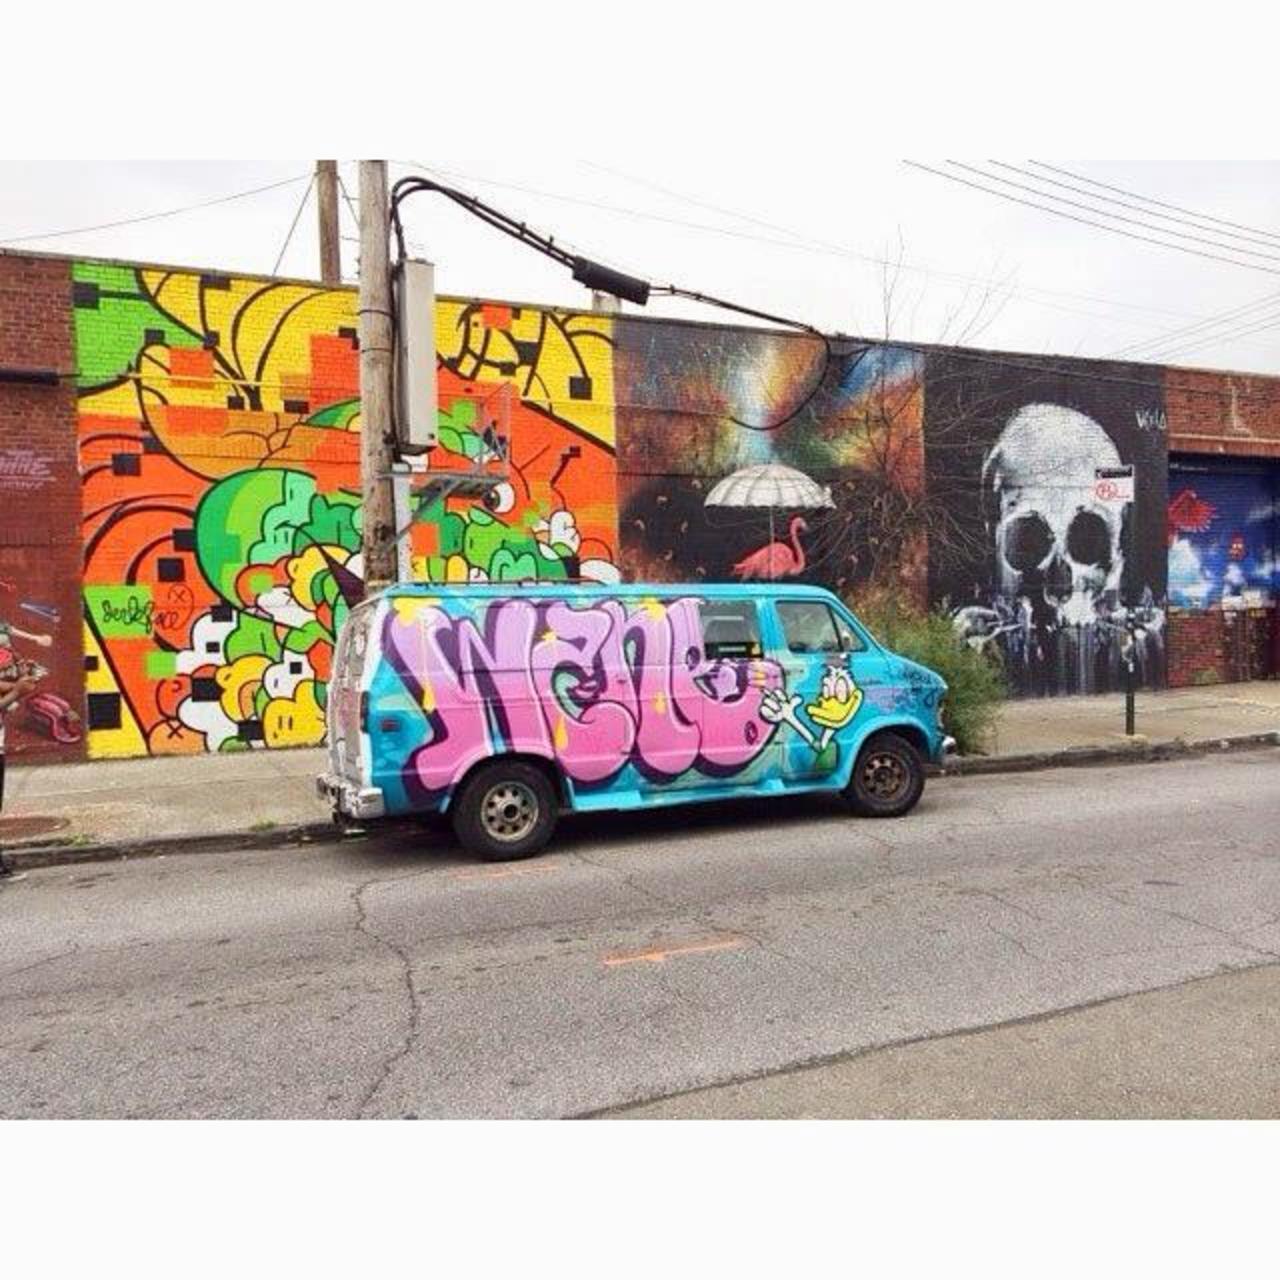 I saw this van in #brooklyn . Does anyone know of the #artist ? #streetart #graffiti http://t.co/LrQ0763Df0